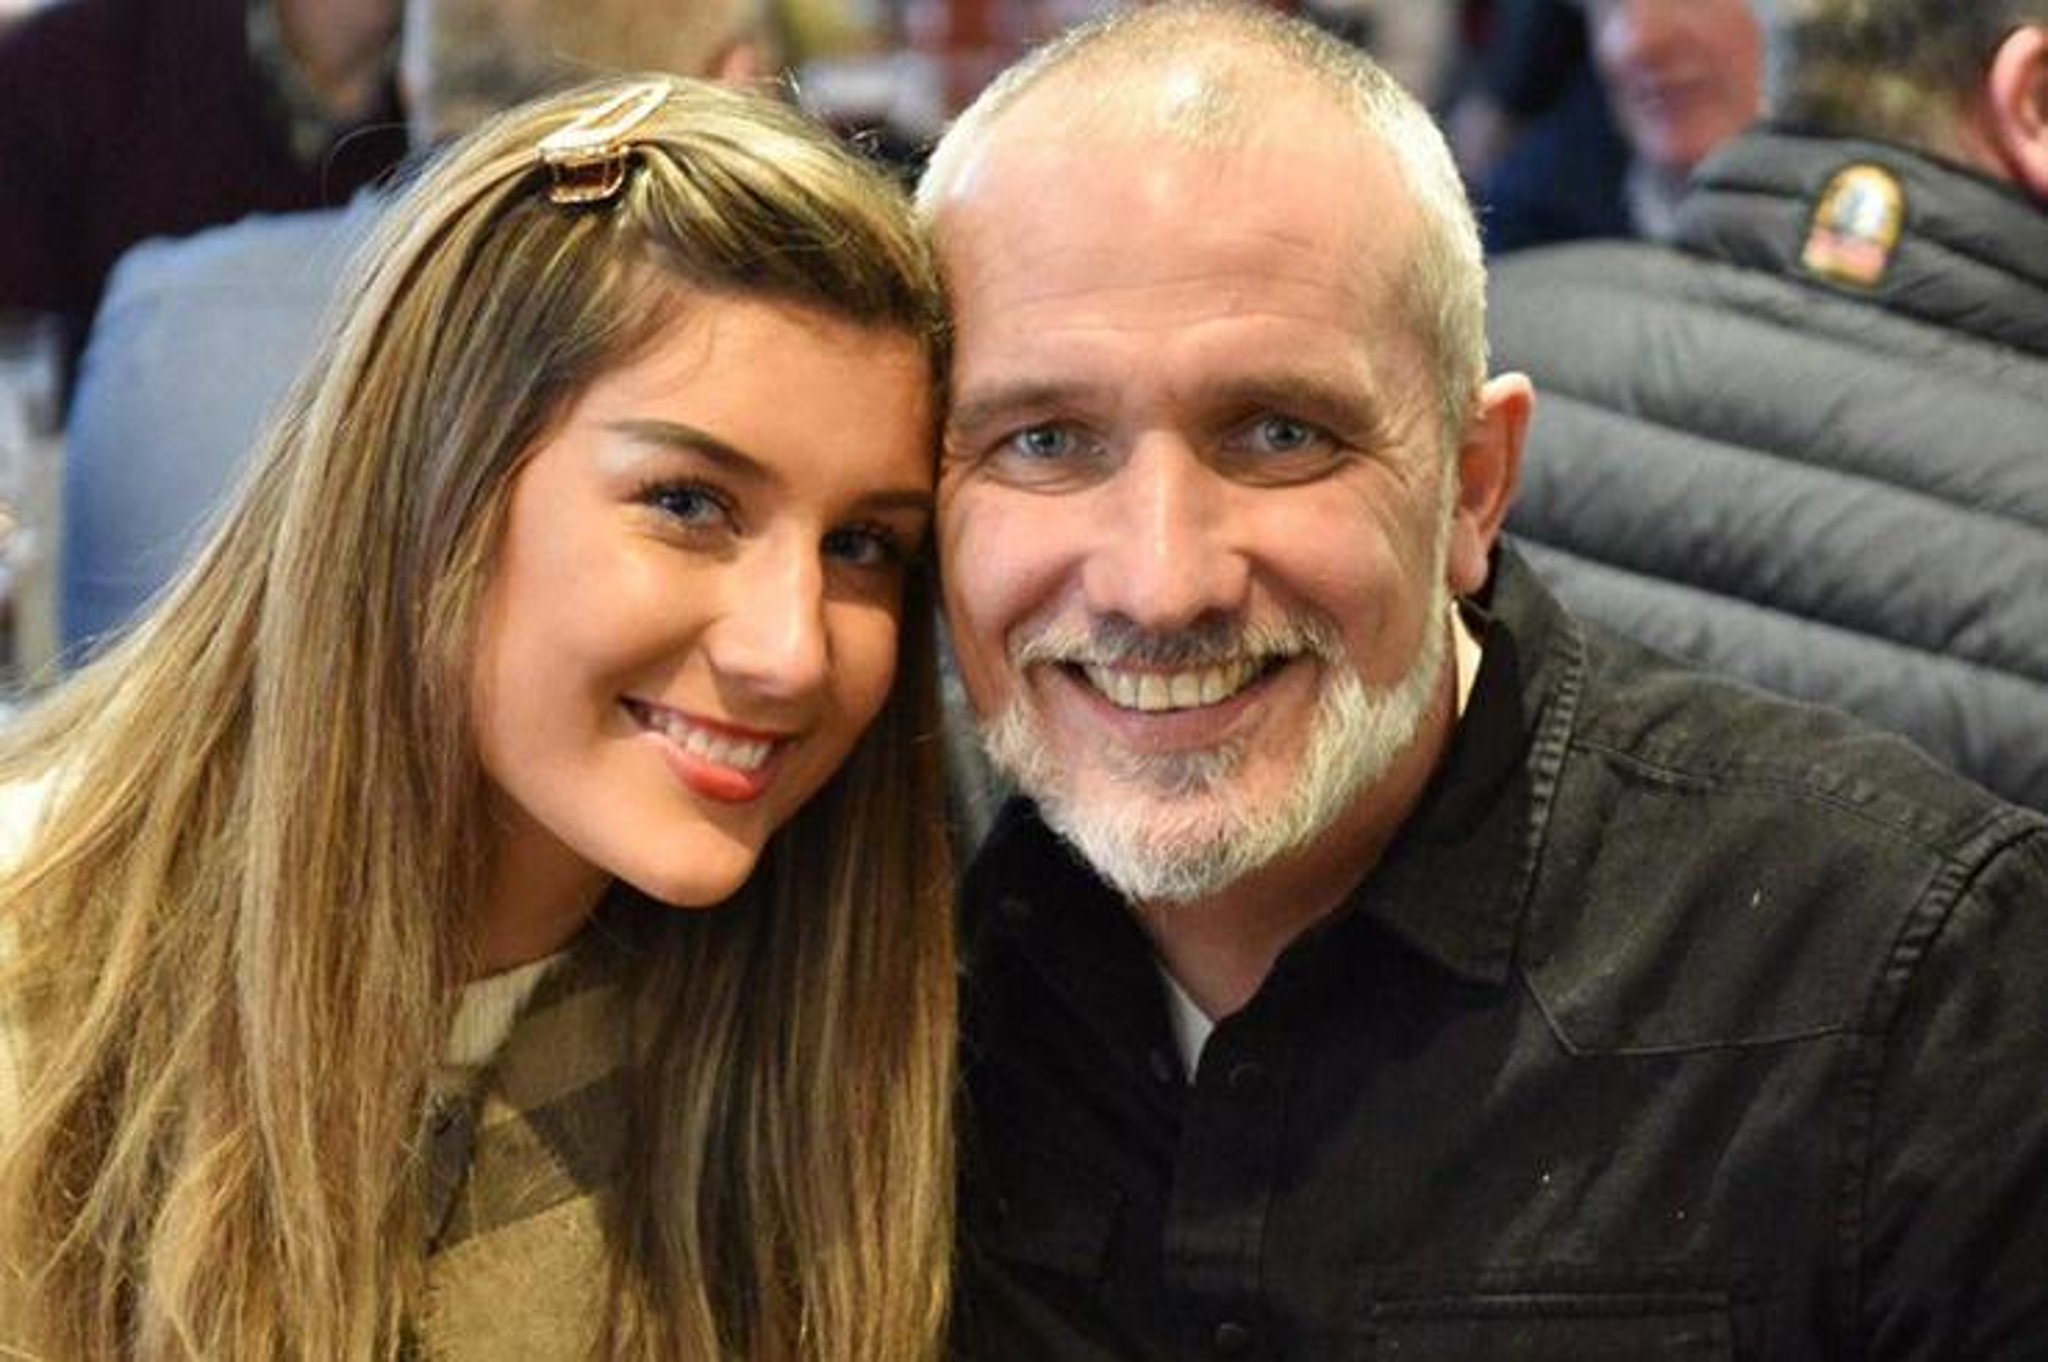 After her dad passed away, a Scottish student created a blog to help young people deal with grief